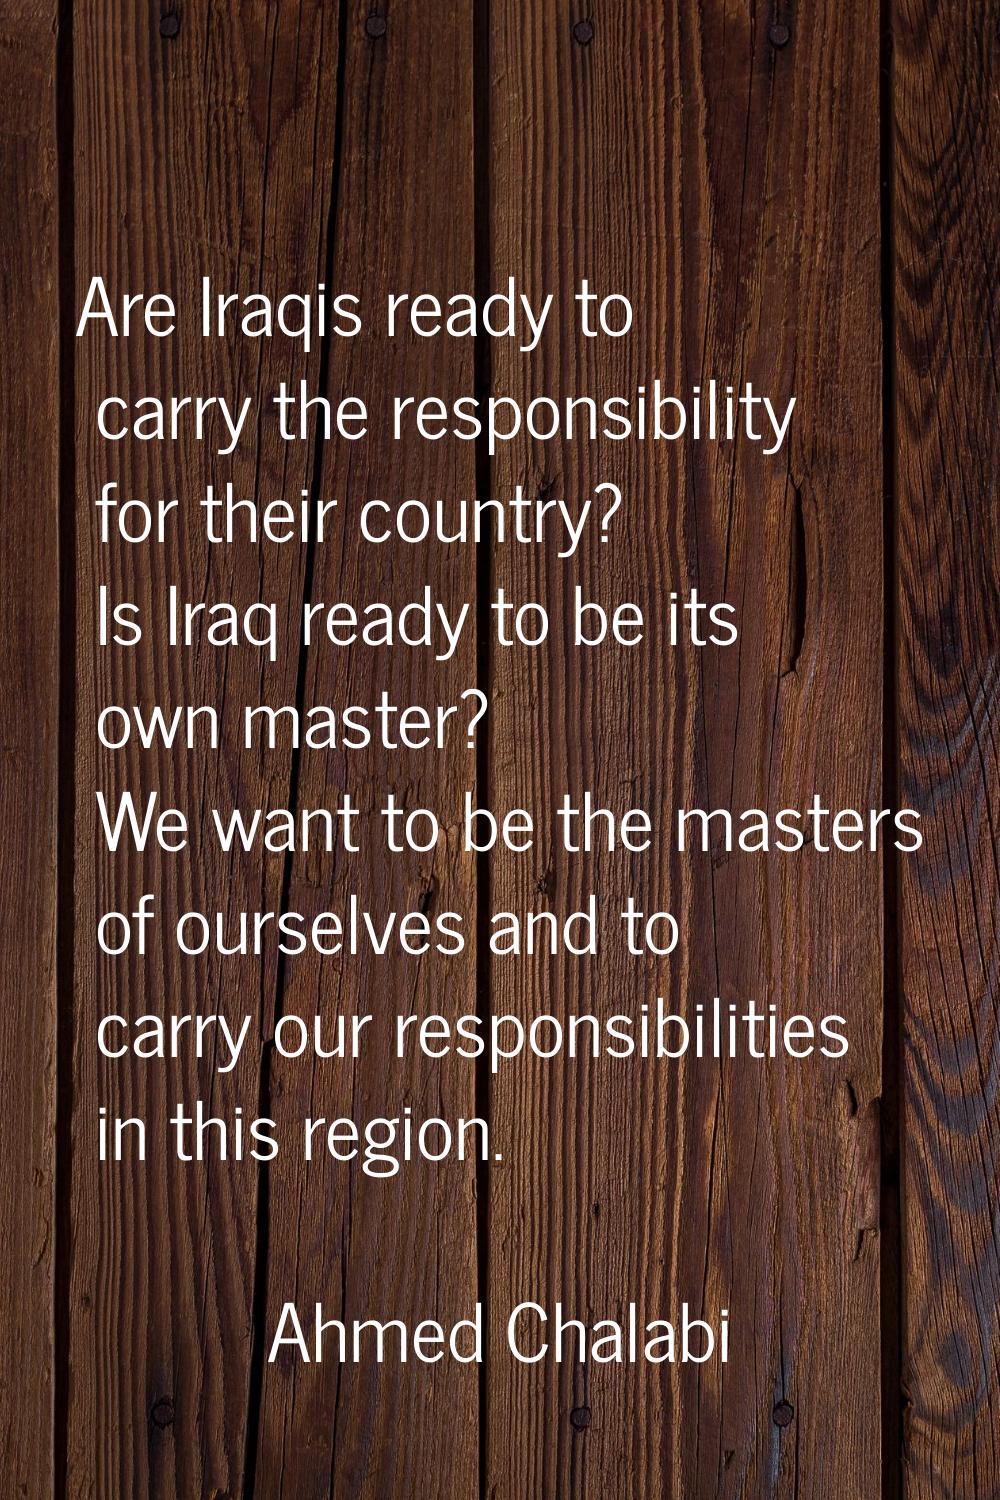 Are Iraqis ready to carry the responsibility for their country? Is Iraq ready to be its own master?